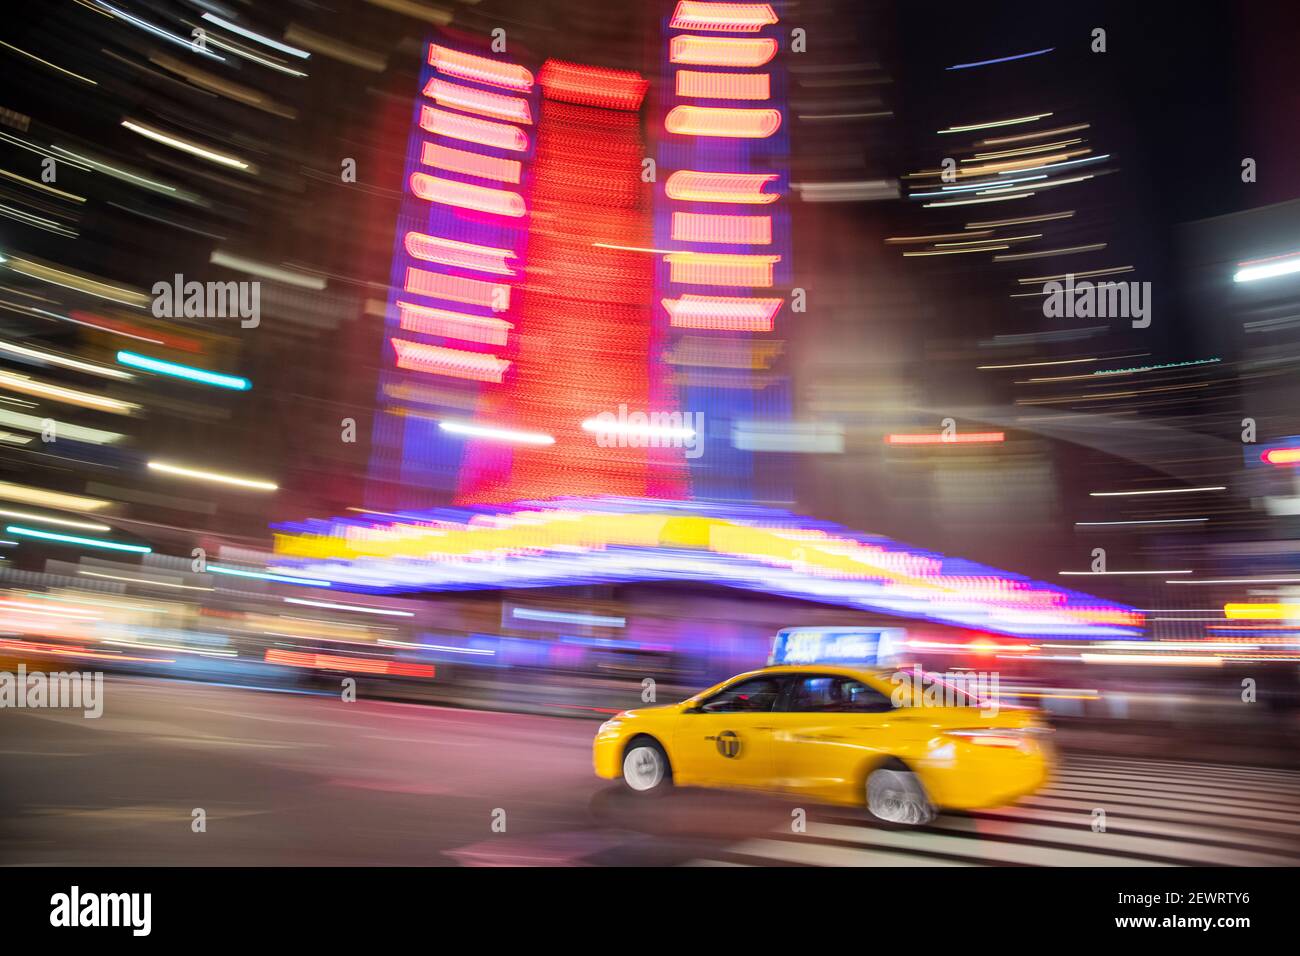 Taxis blurring down a street in Manhattan, New York City, New York, United States of America, North America Stock Photo